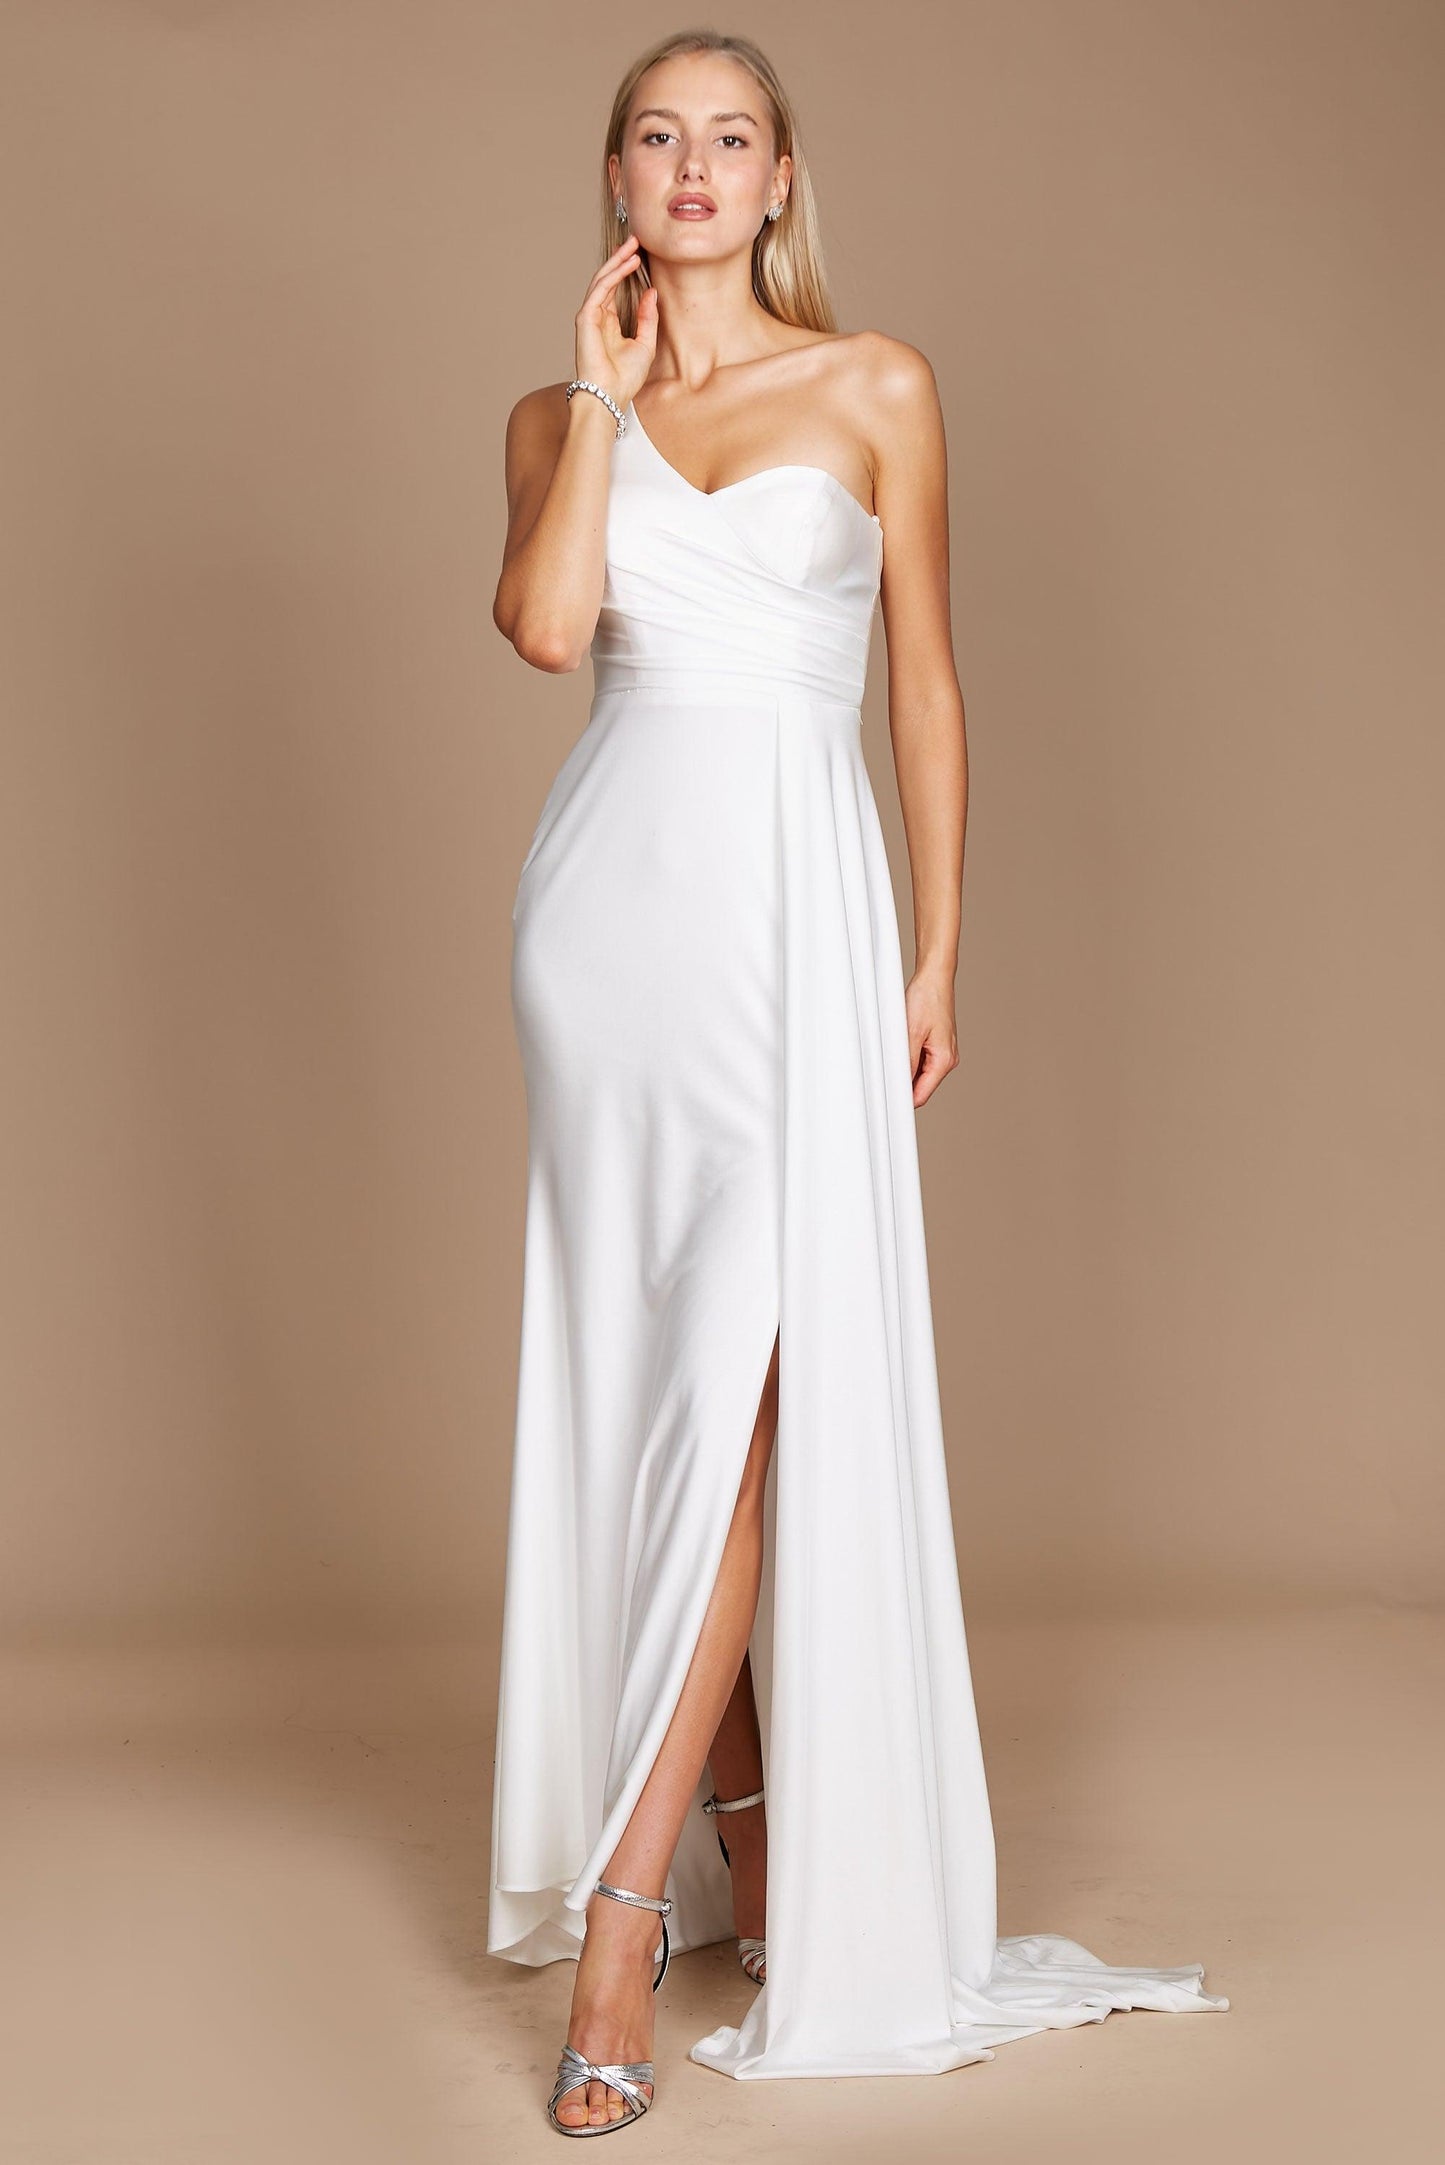 Prom Dresses One Shoulder Long Evening Gown Prom Dress White